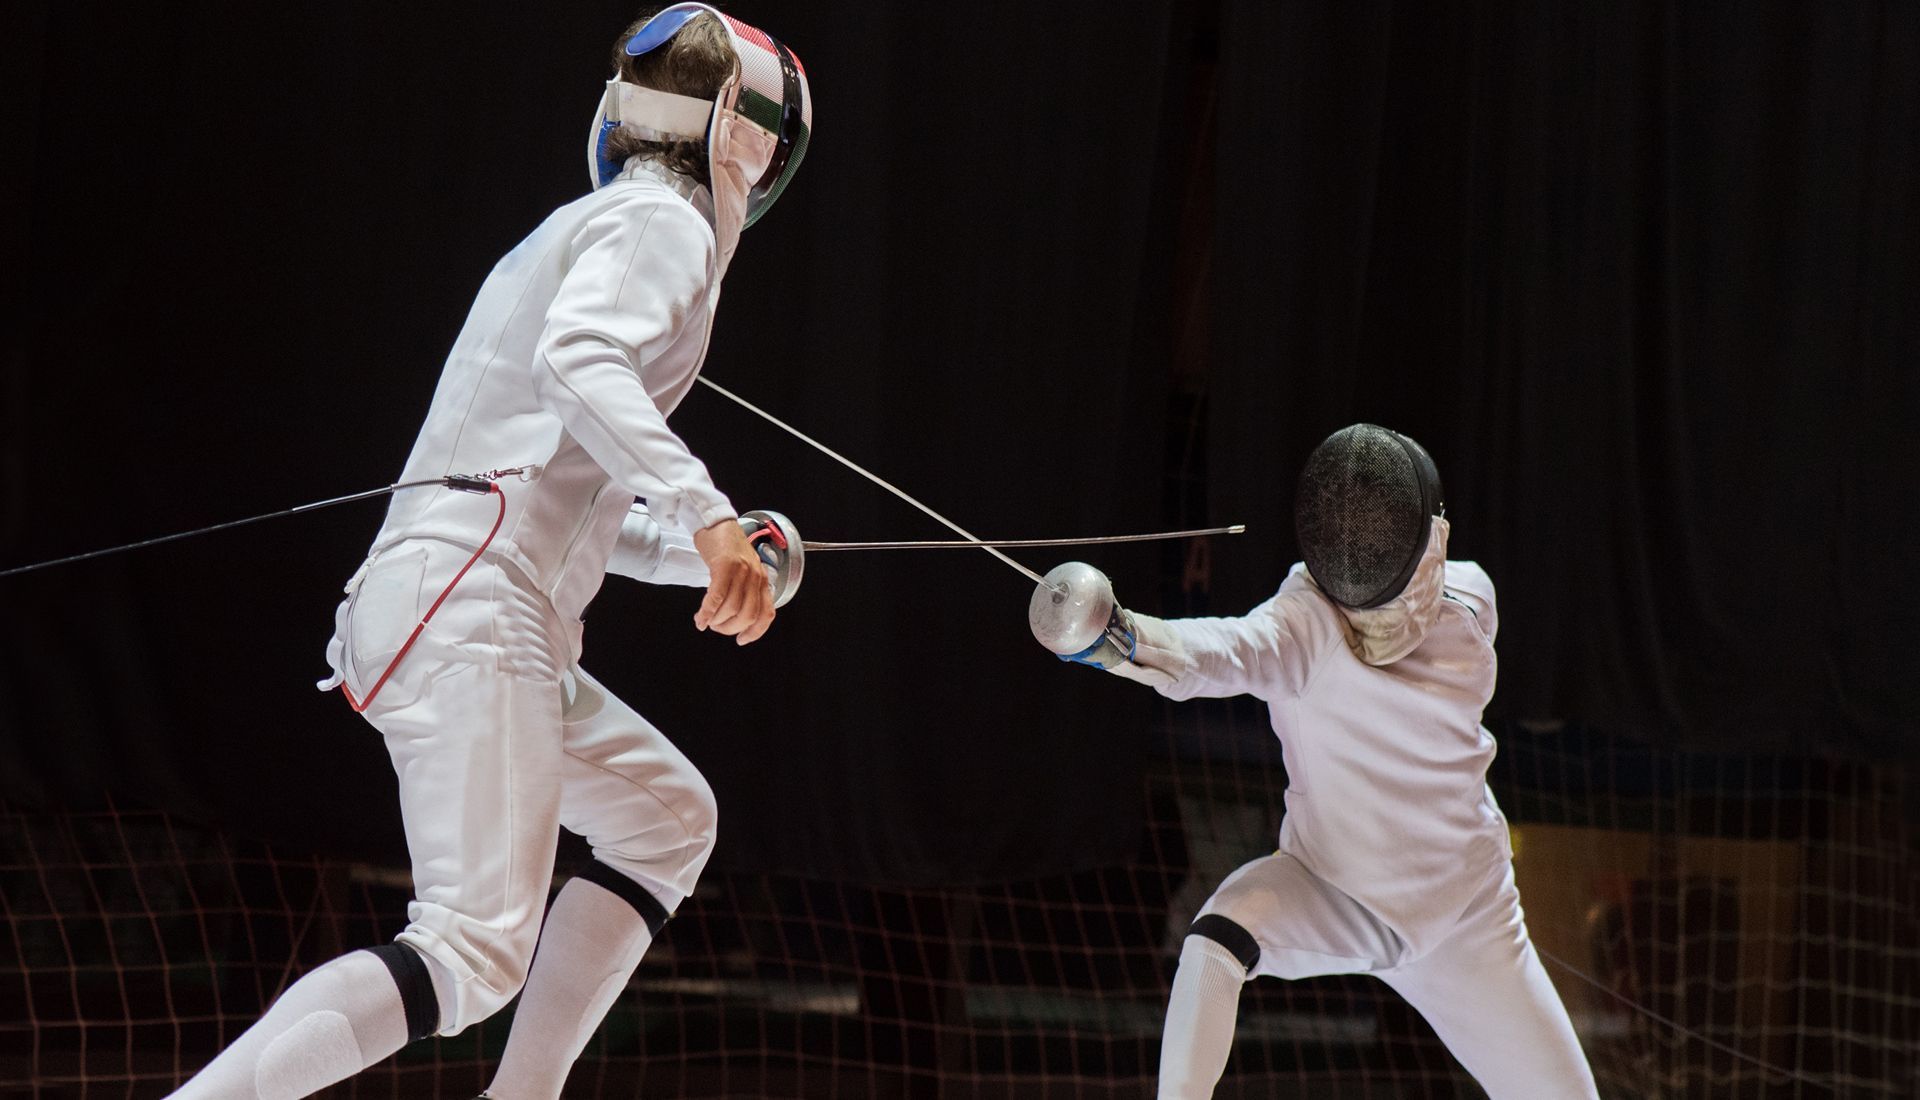 Two Fencing Athletes